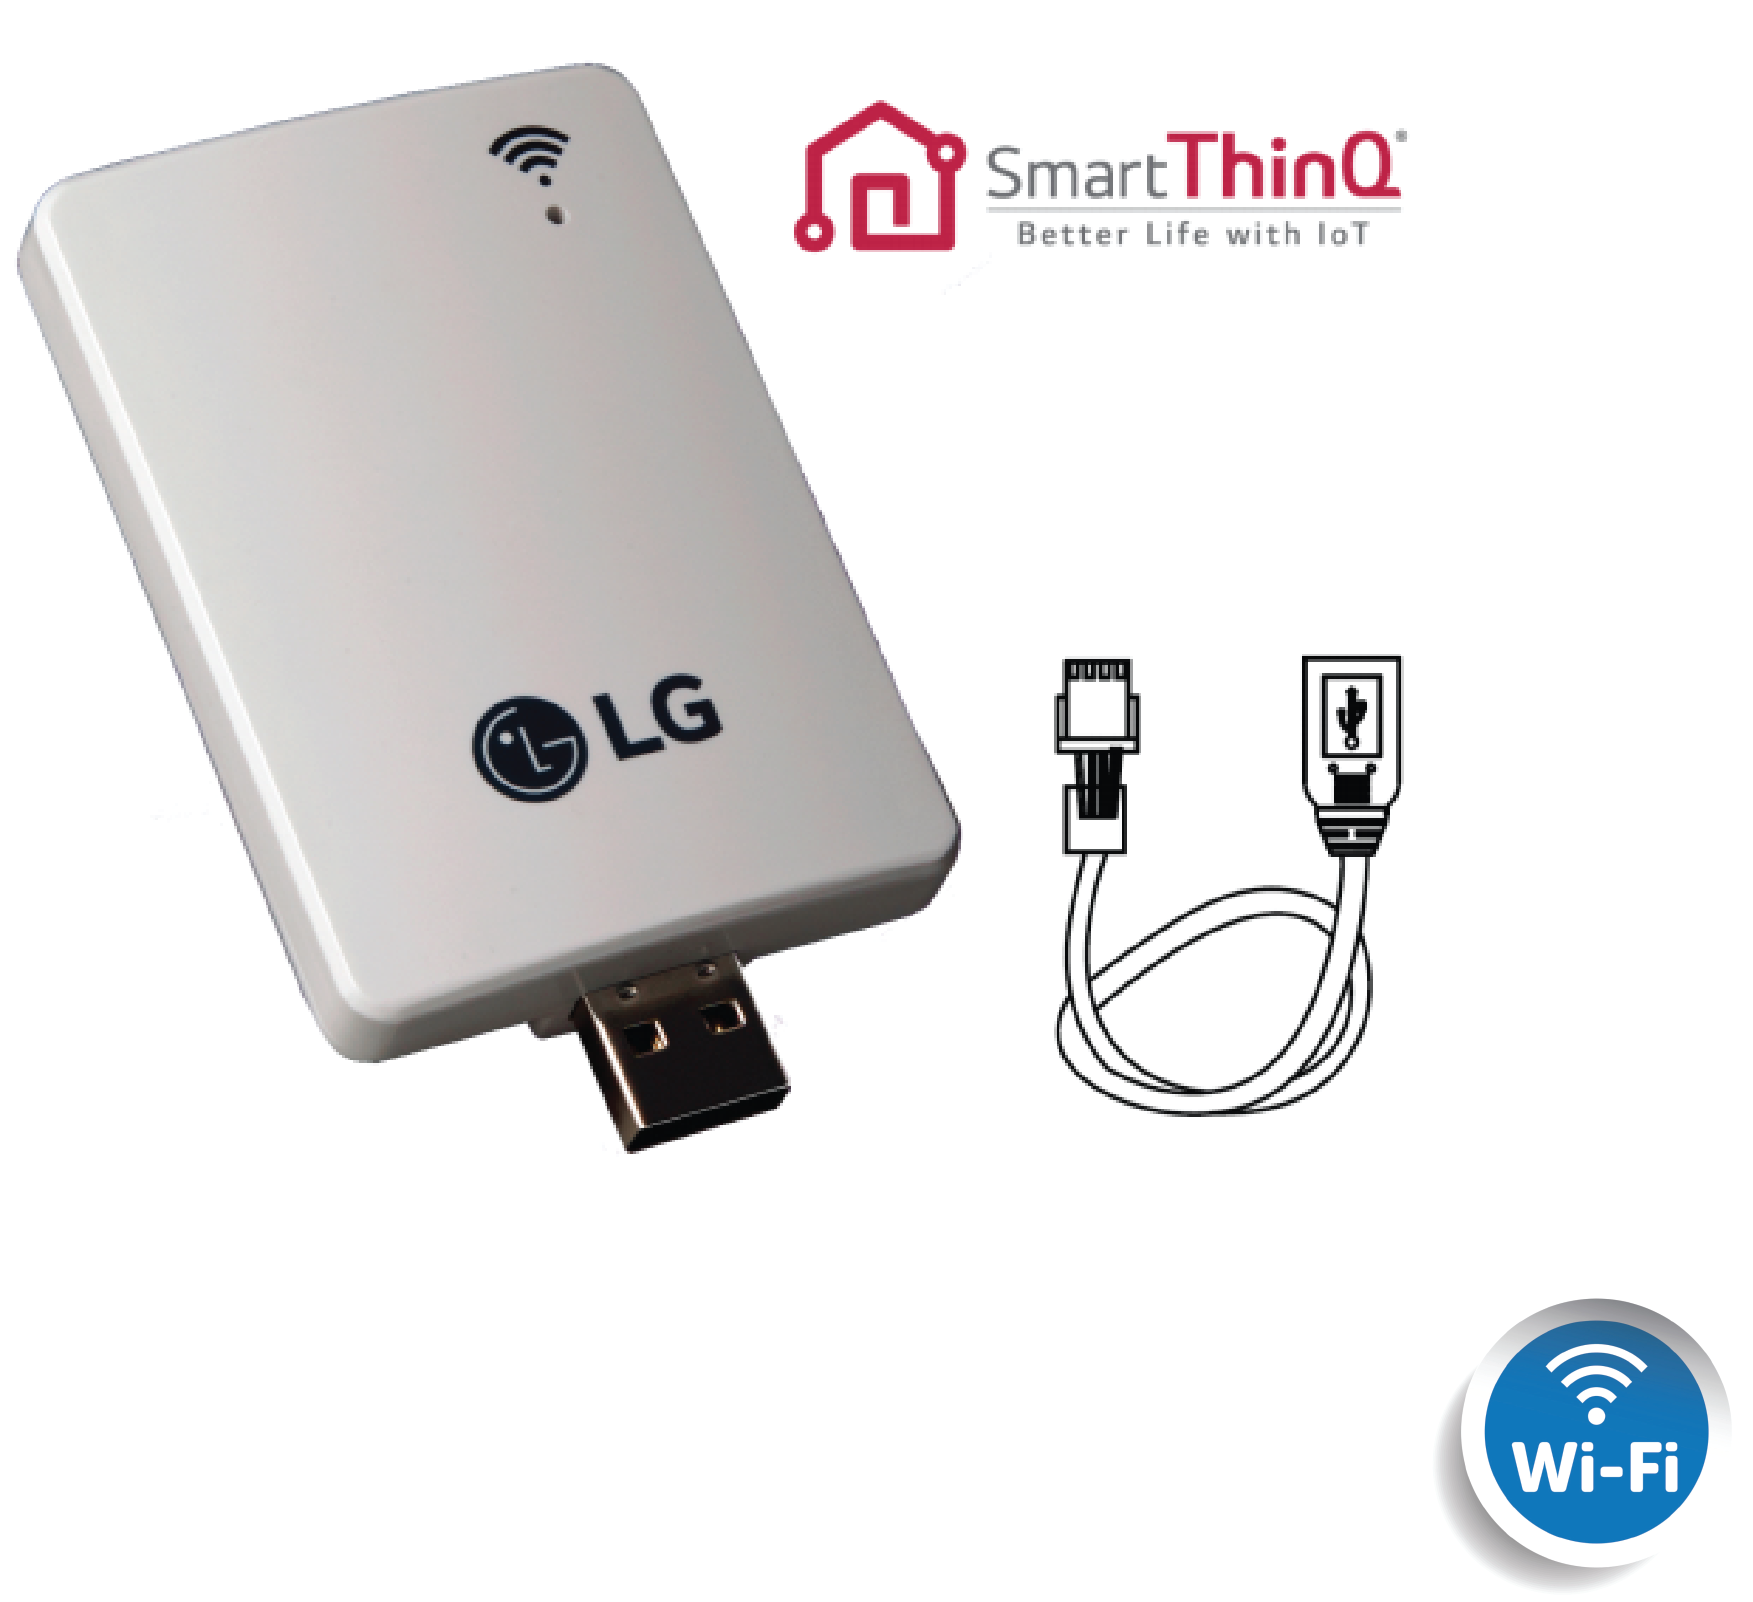 LG WiFi Module with SmartThinQ? compatibility